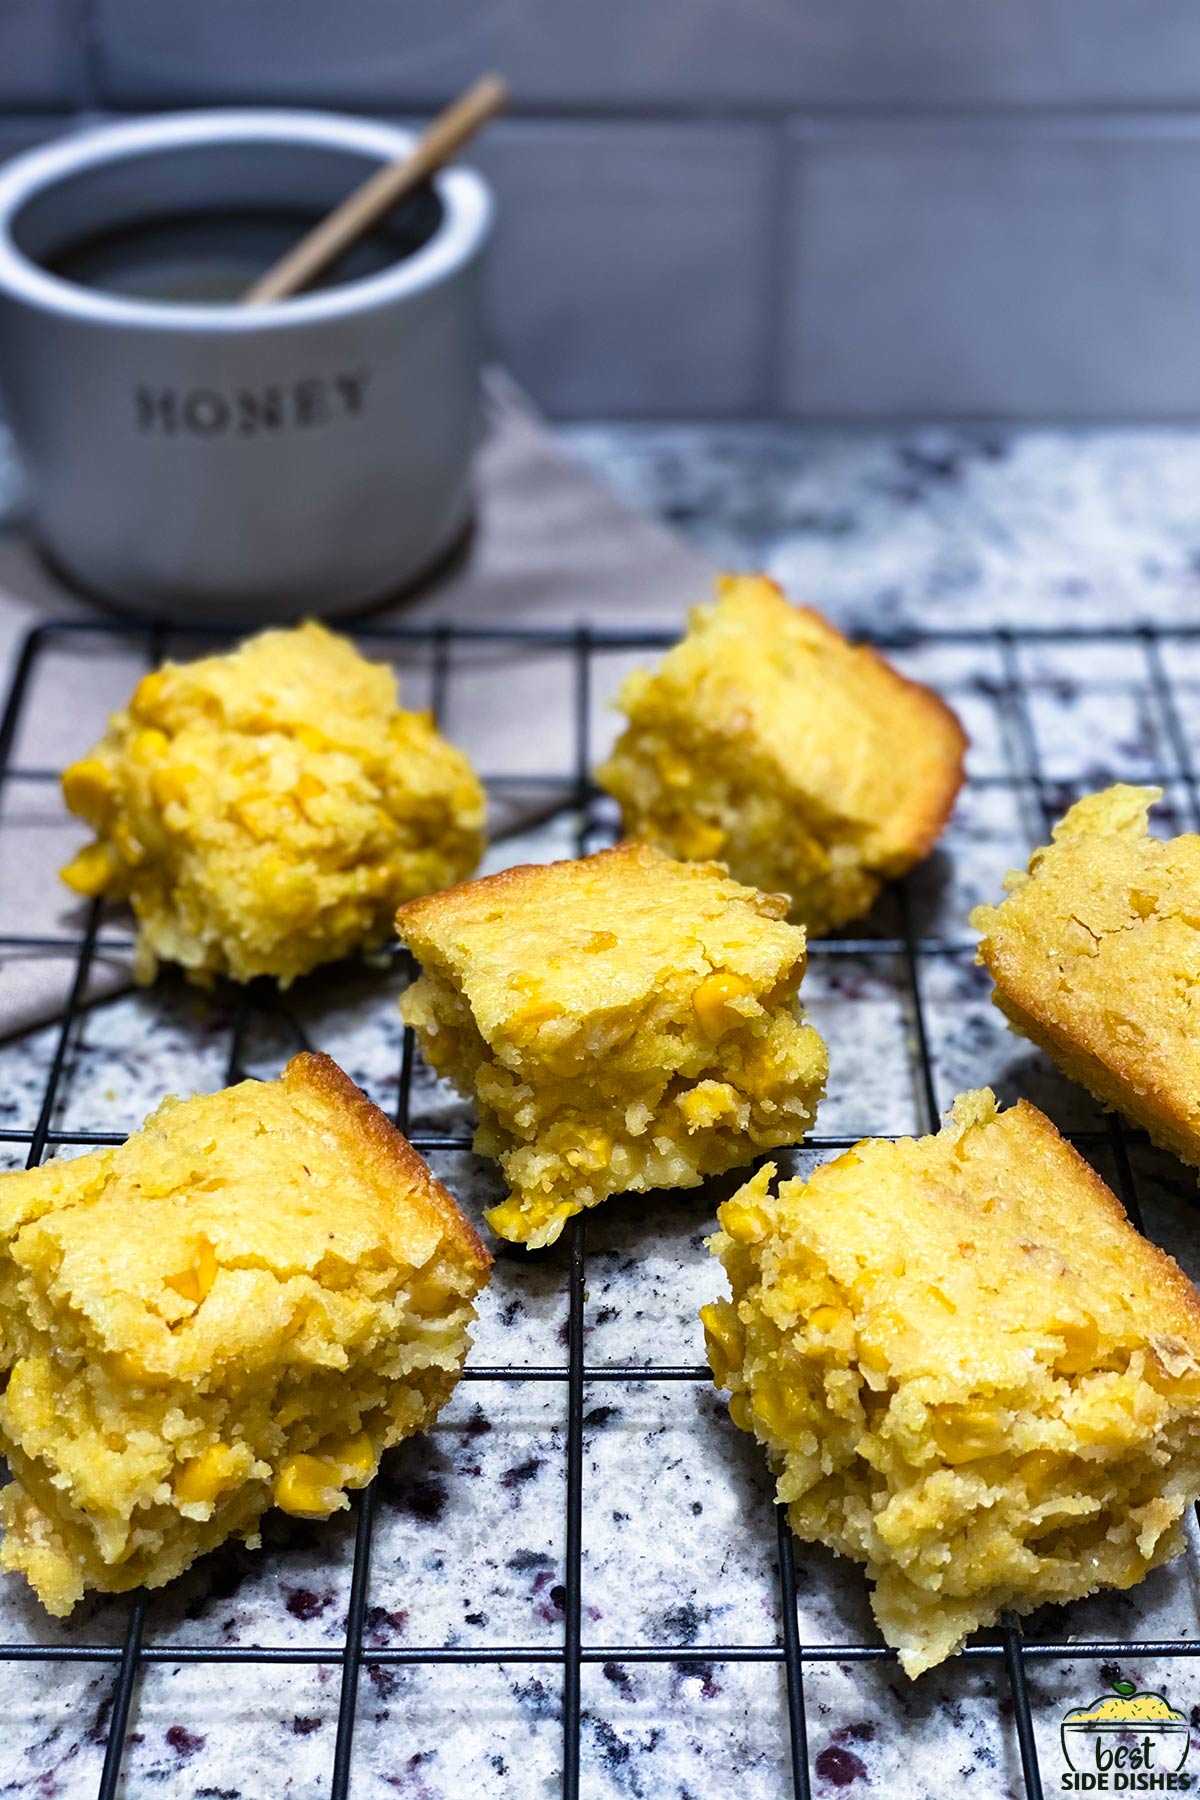 Slices of corn casserole on a baking rack